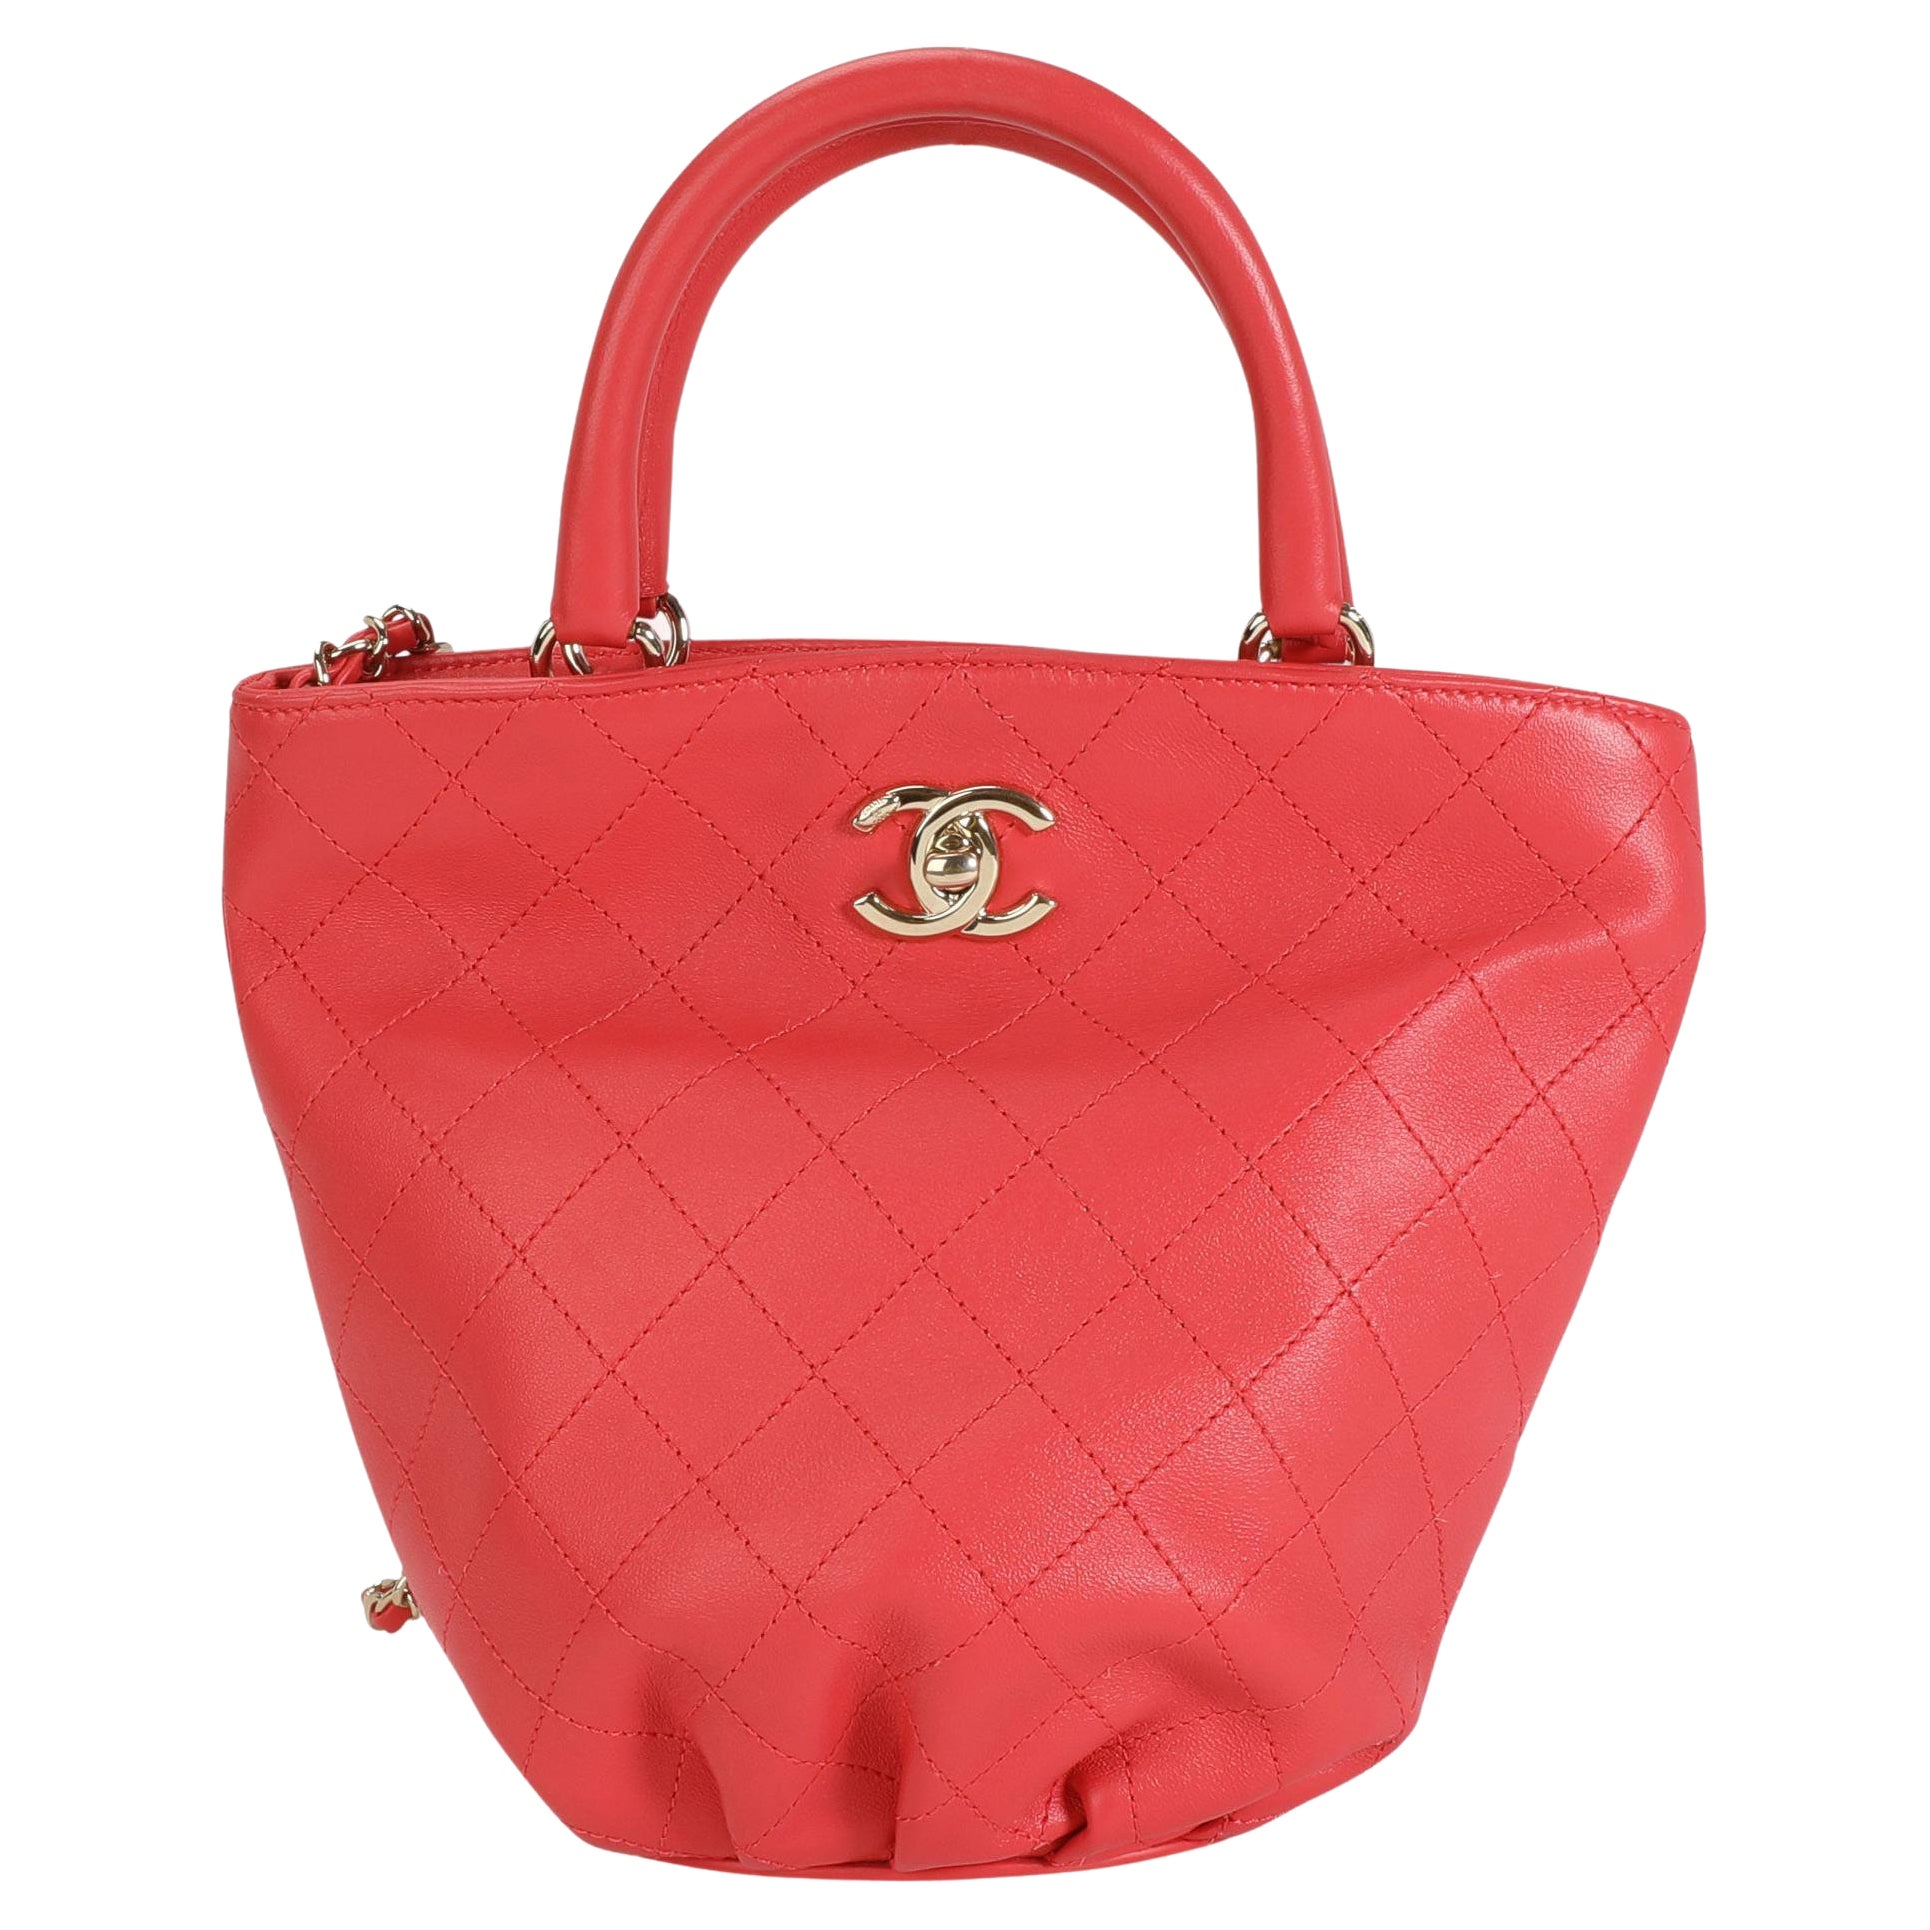 Chanel Coral Quilted Calfskin Small Bucket Bag